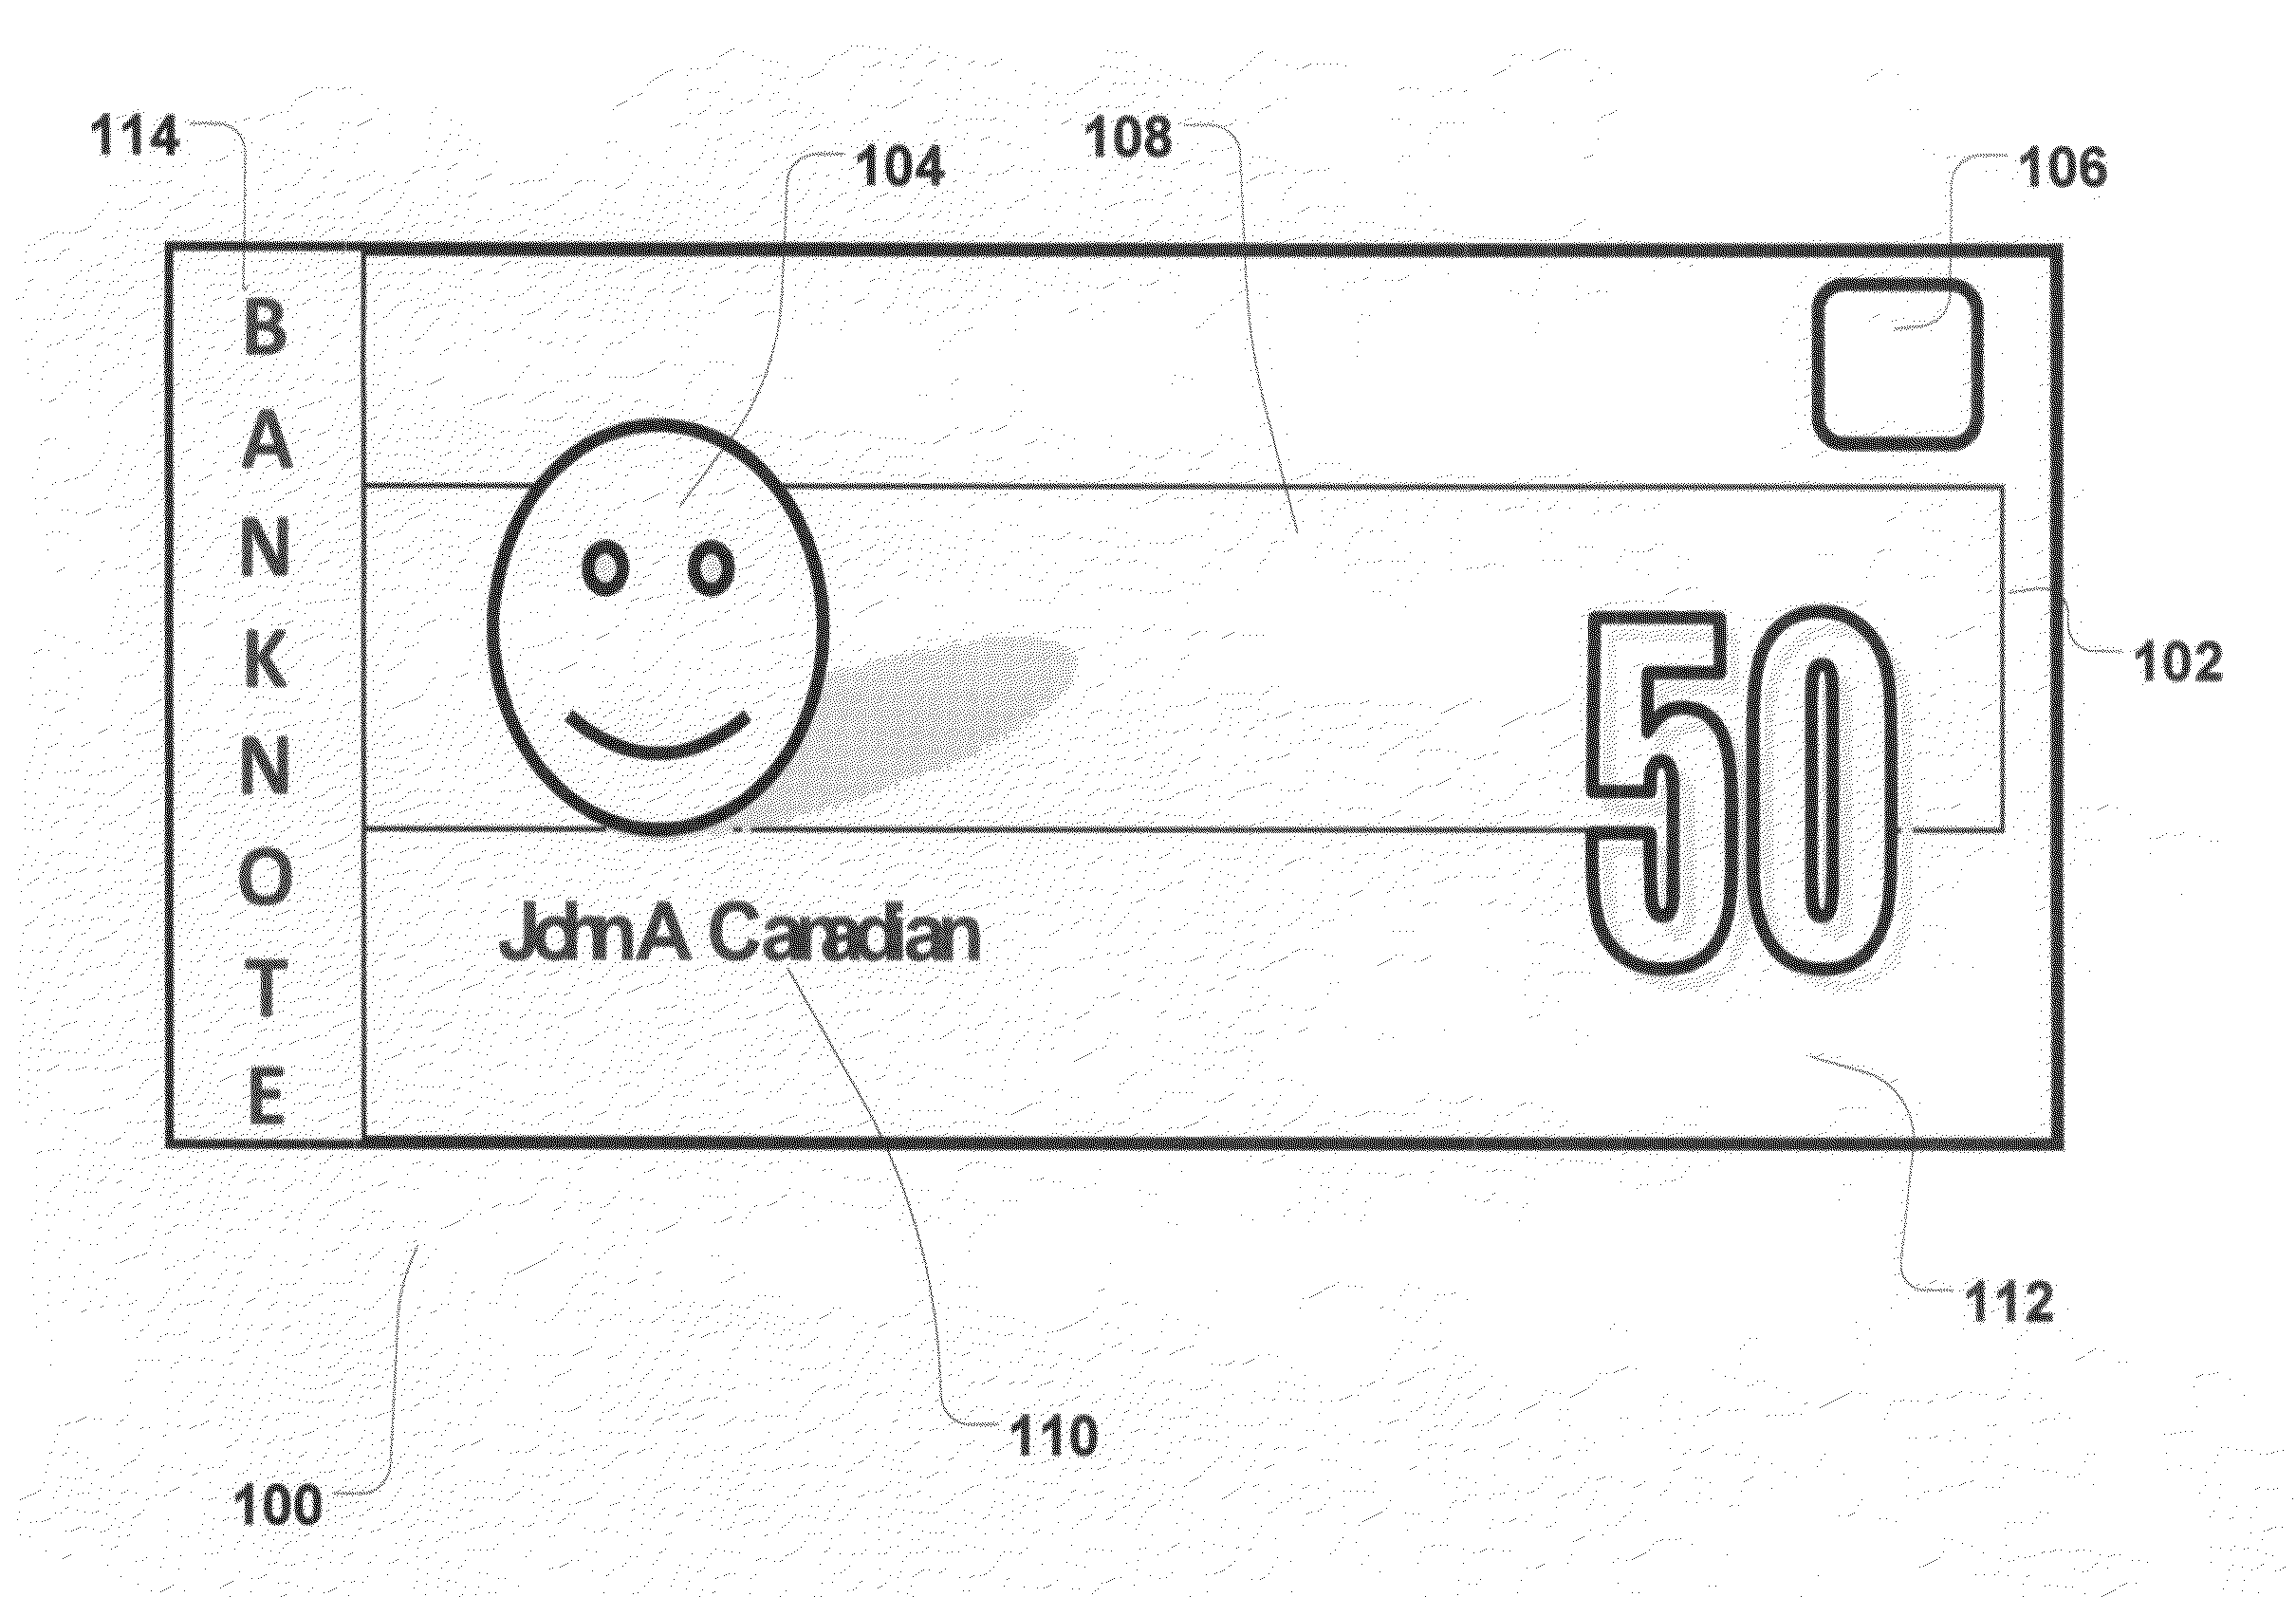 Security document with electroactive polymer power source and nano-optical display